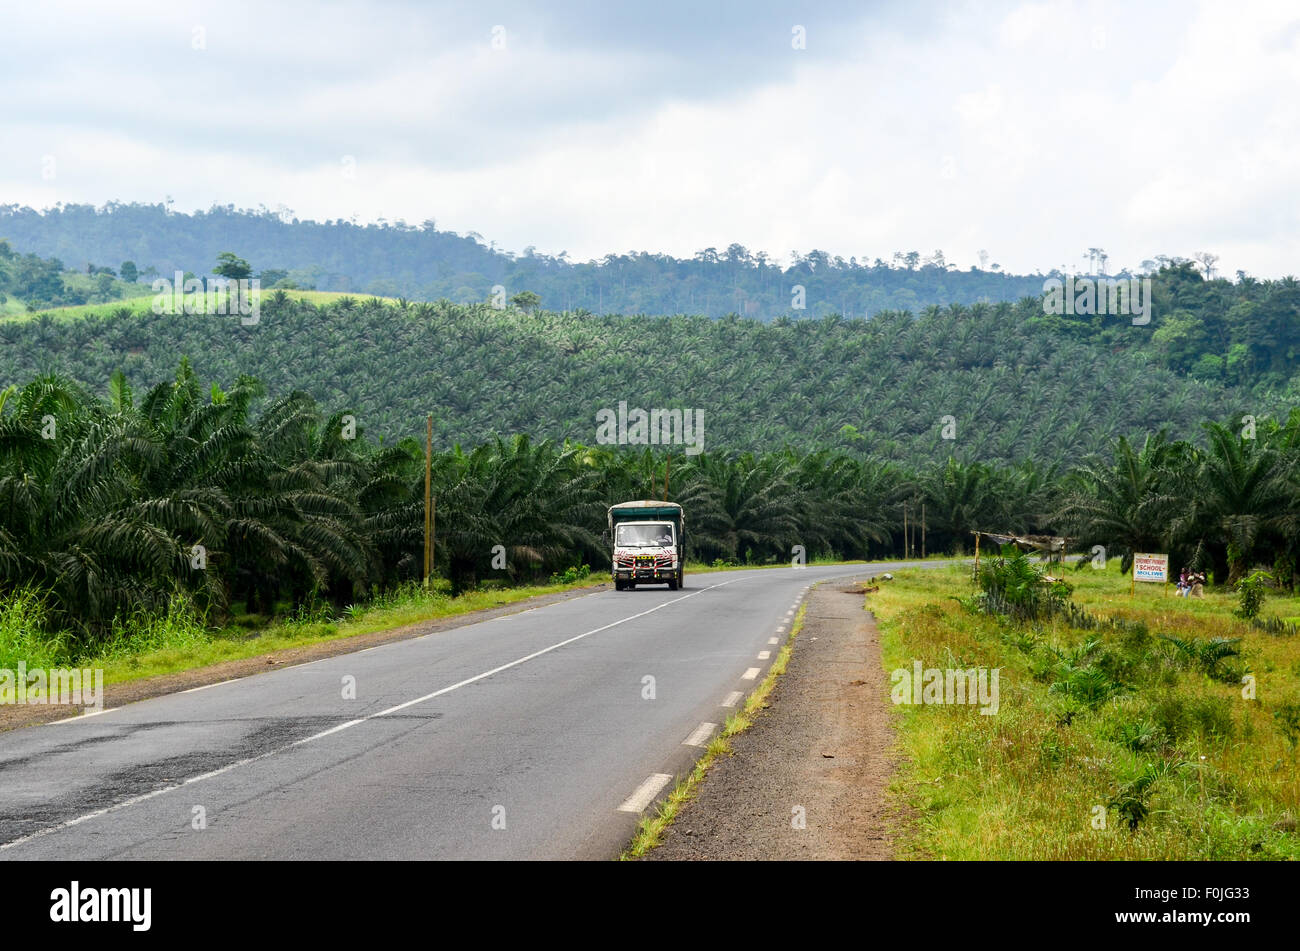 Truck on a road crossing into a palm tree plantation near Mount Cameroon Stock Photo